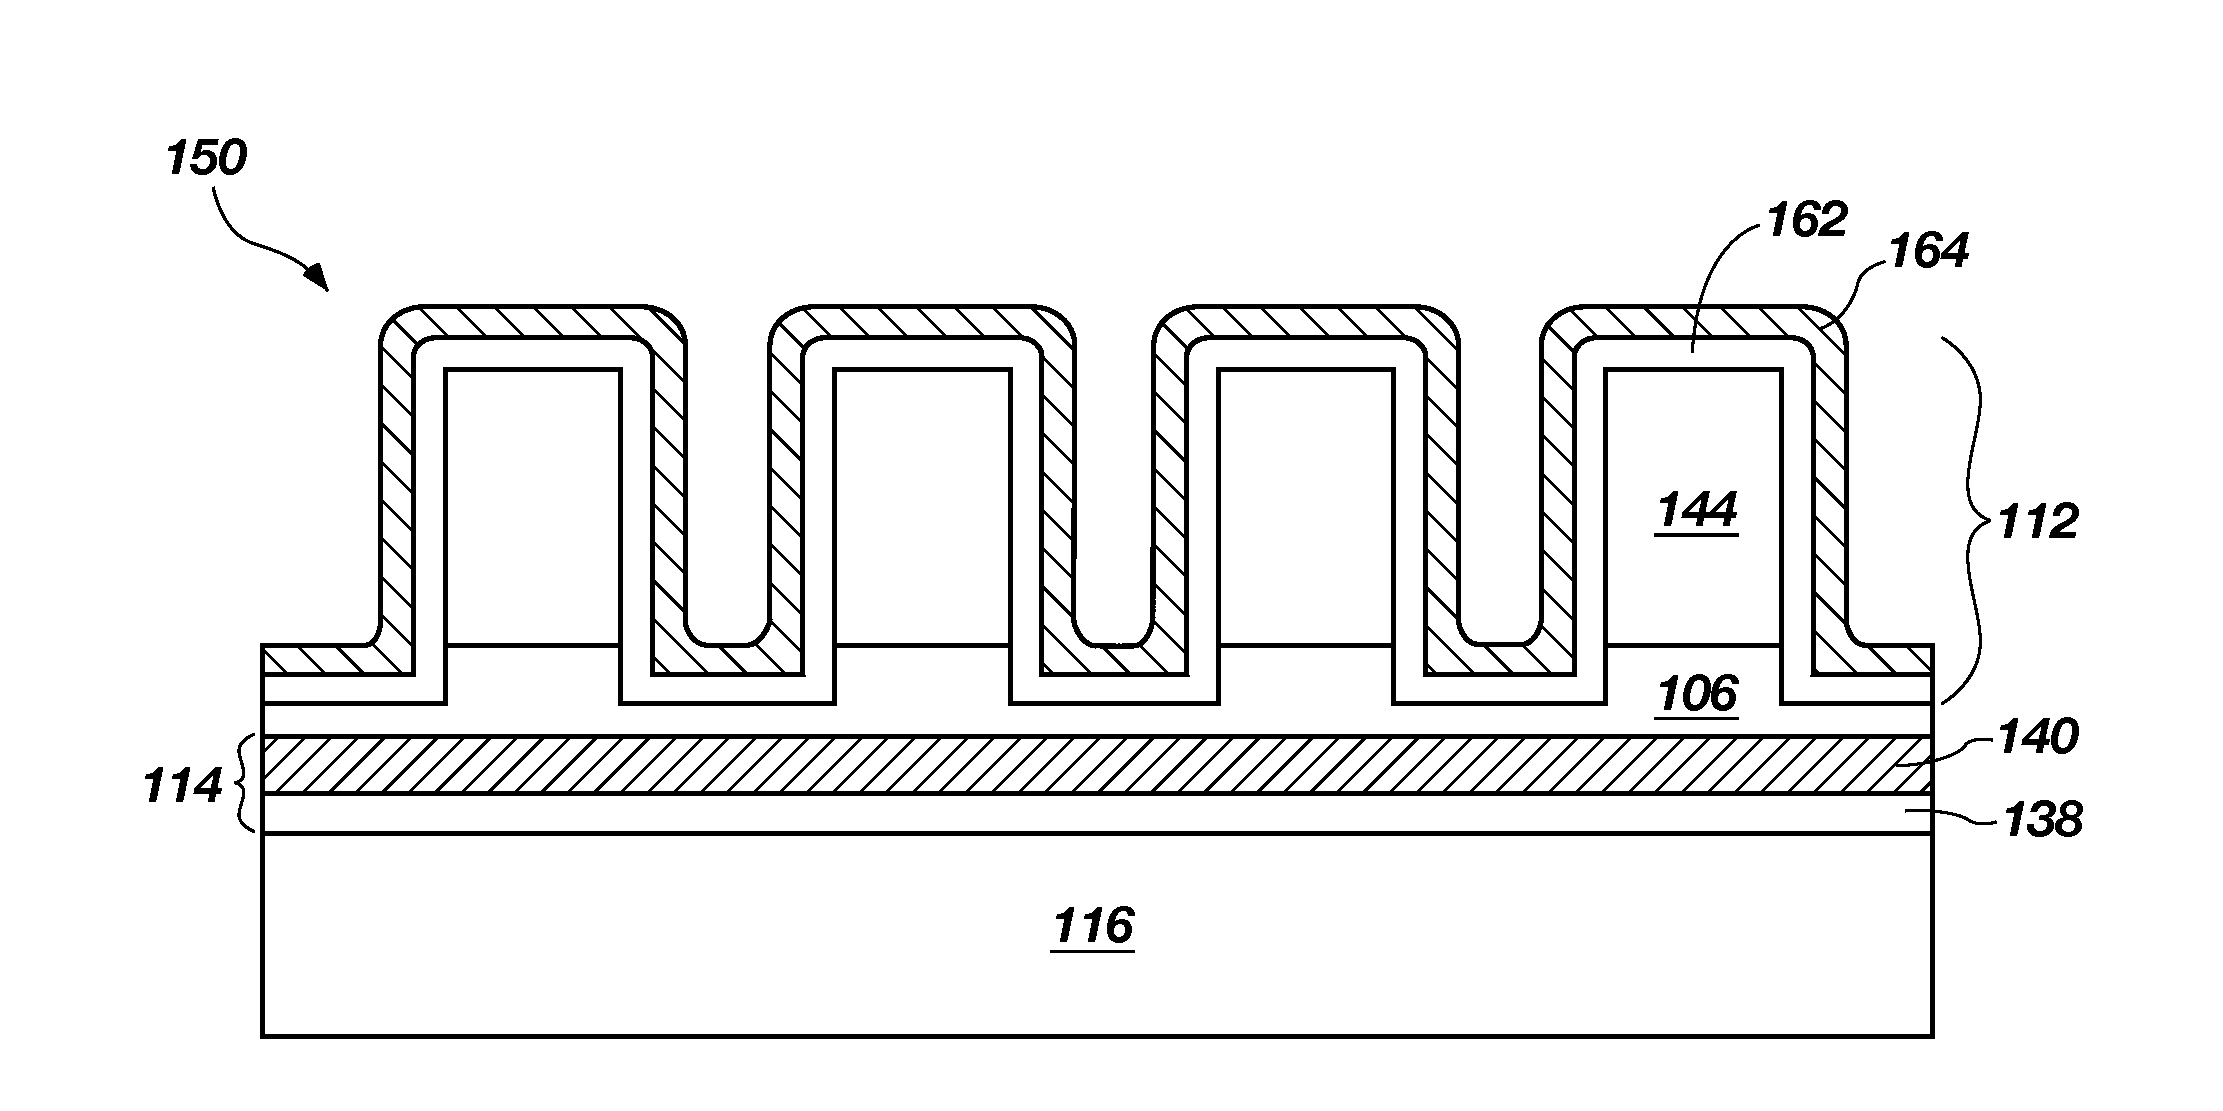 Semiconductor cells, arrays, devices and systems having a buried conductive line and methods for forming the same